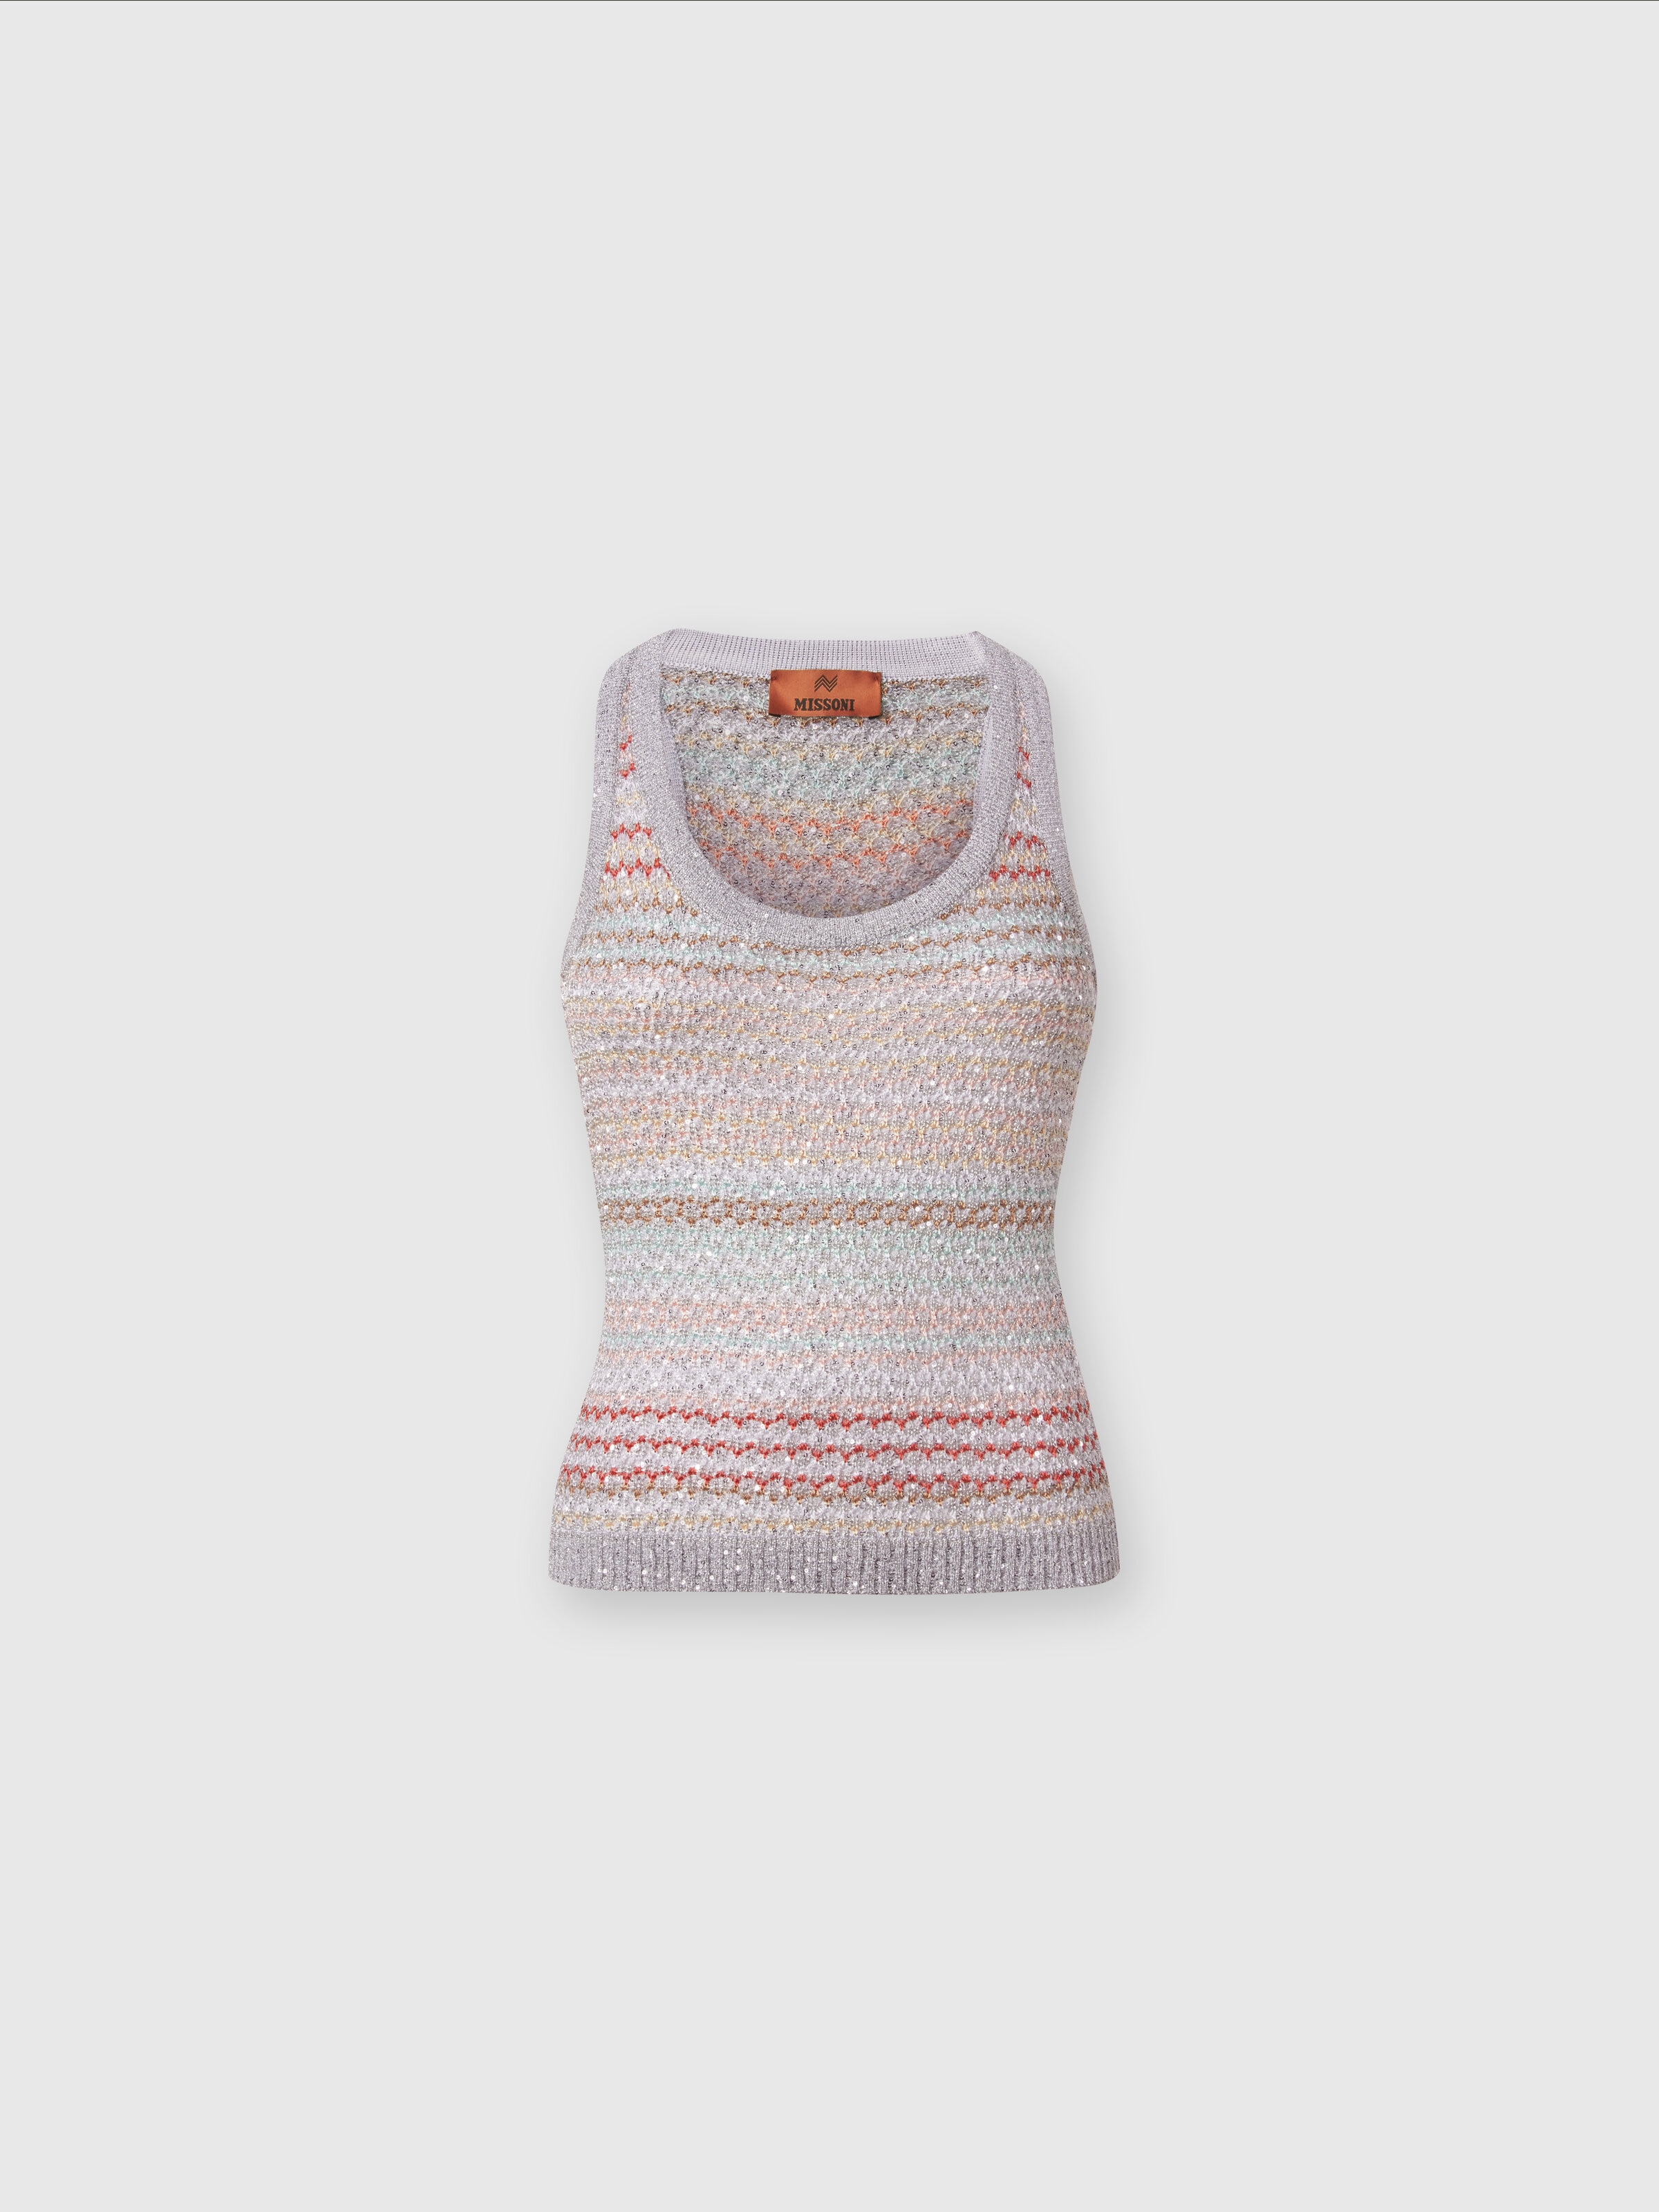 Tank top in mesh knit with sequin appliqué , Multicoloured  - 0